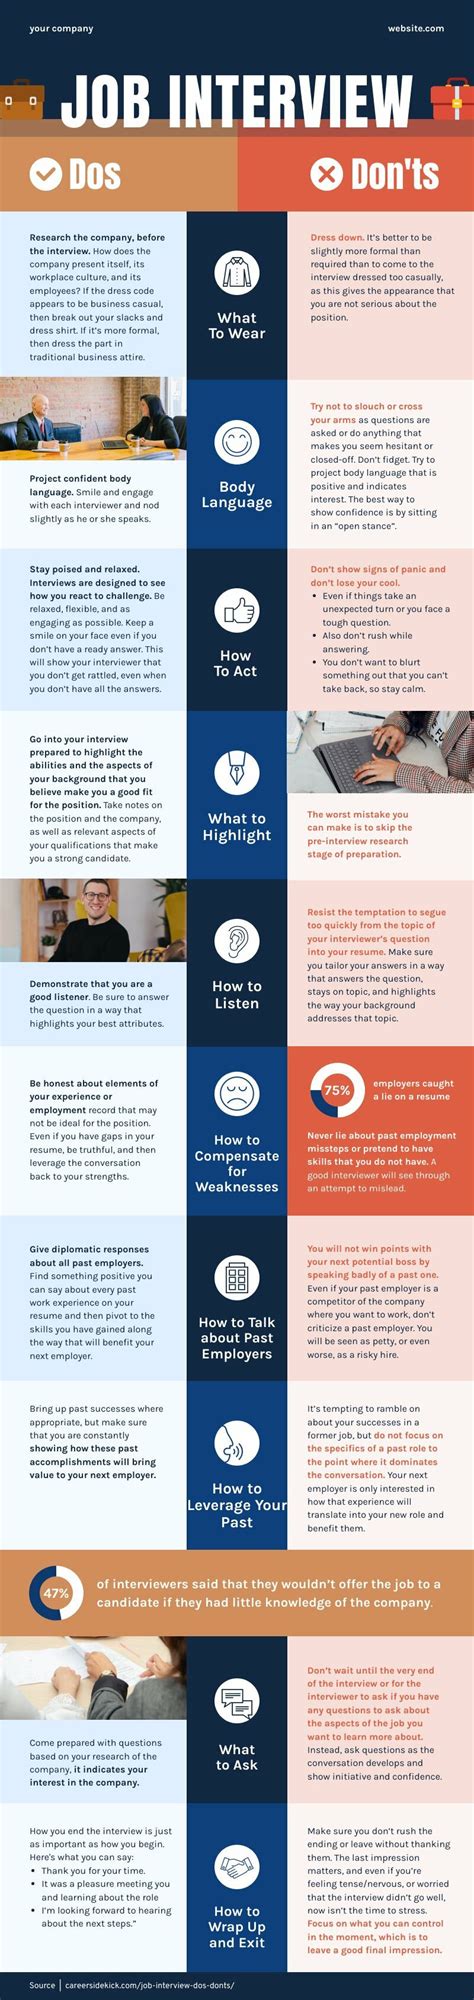 interview dos and don ts free infographic template piktochart